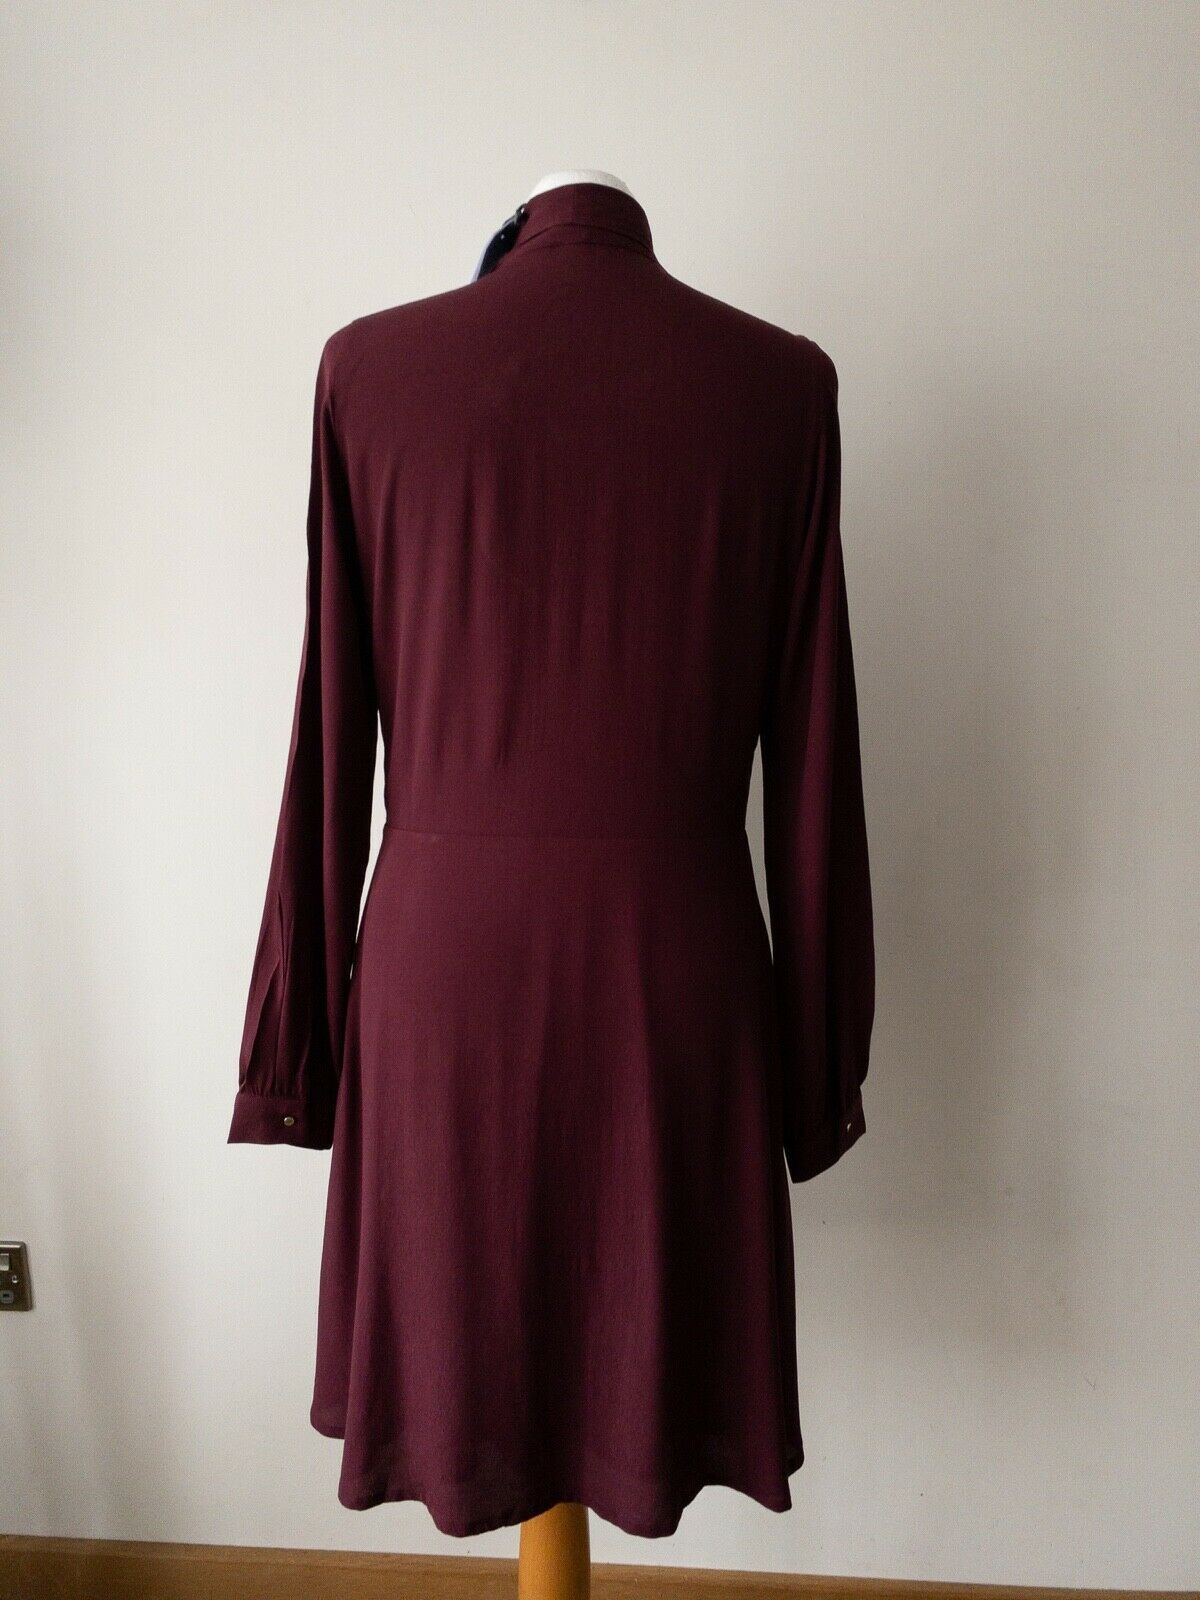 SALSA Burgundy Tie Neck Fit and Flare Dress Size 8